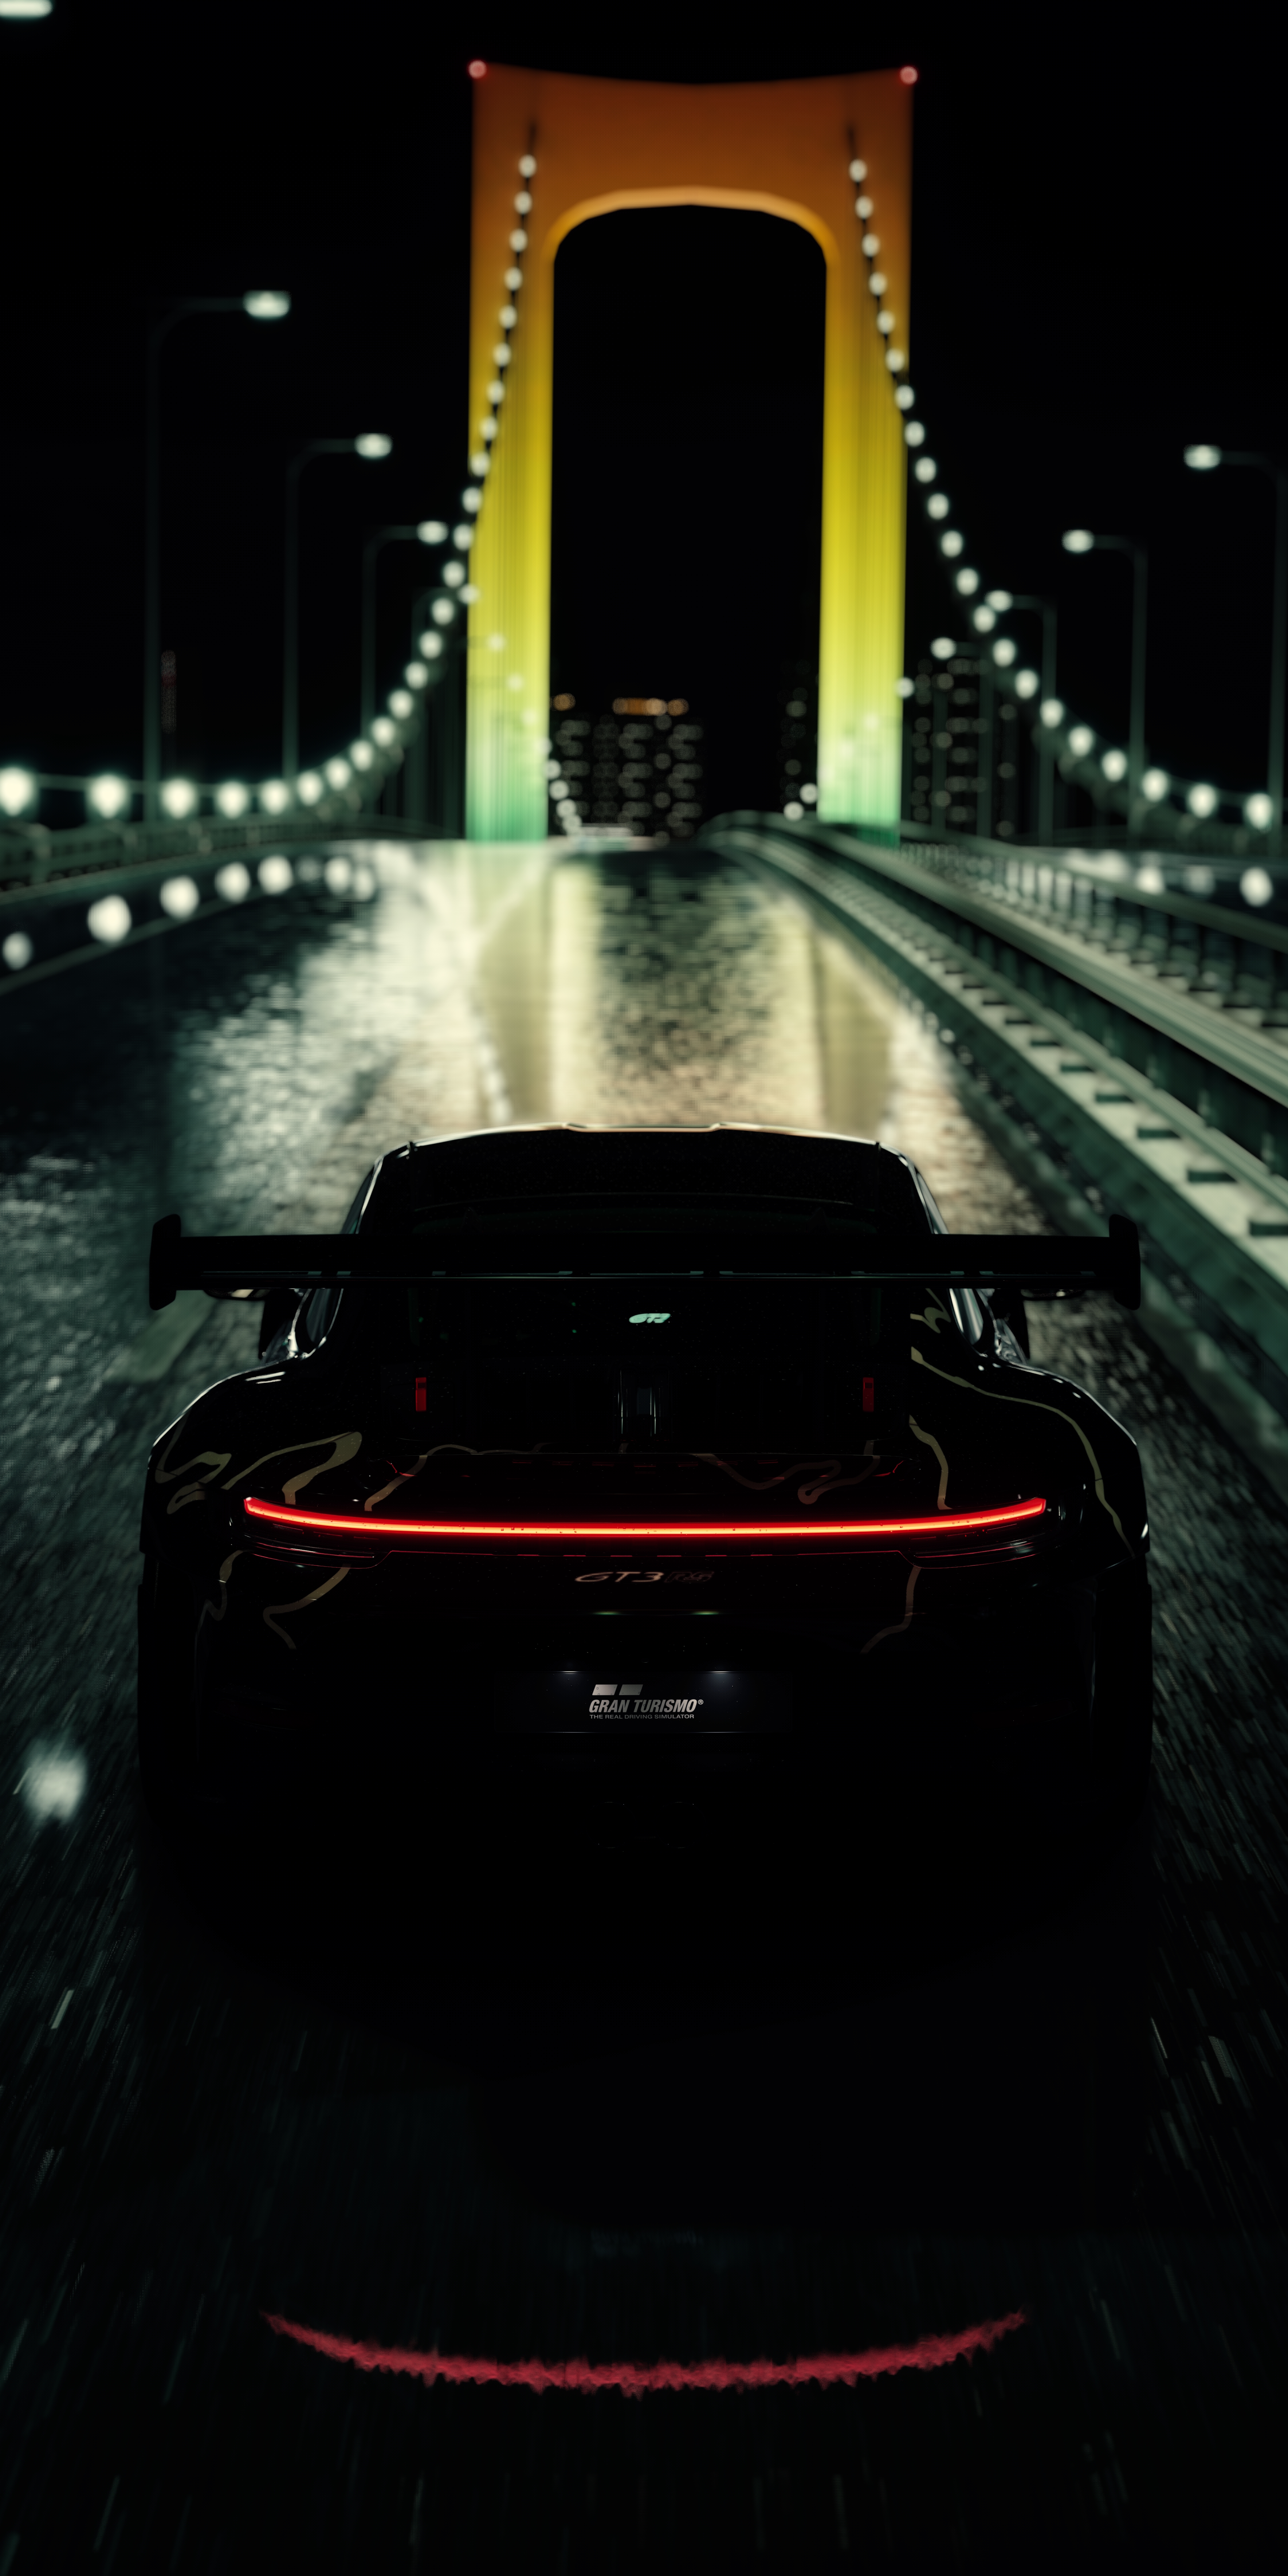 General 3840x7680 Porsche 911 Tokyo bridge Assetto Corsa PC gaming Gran Turismo video game art screen shot taillights rear view car road blurred blurry background night reflection video games lights portrait display